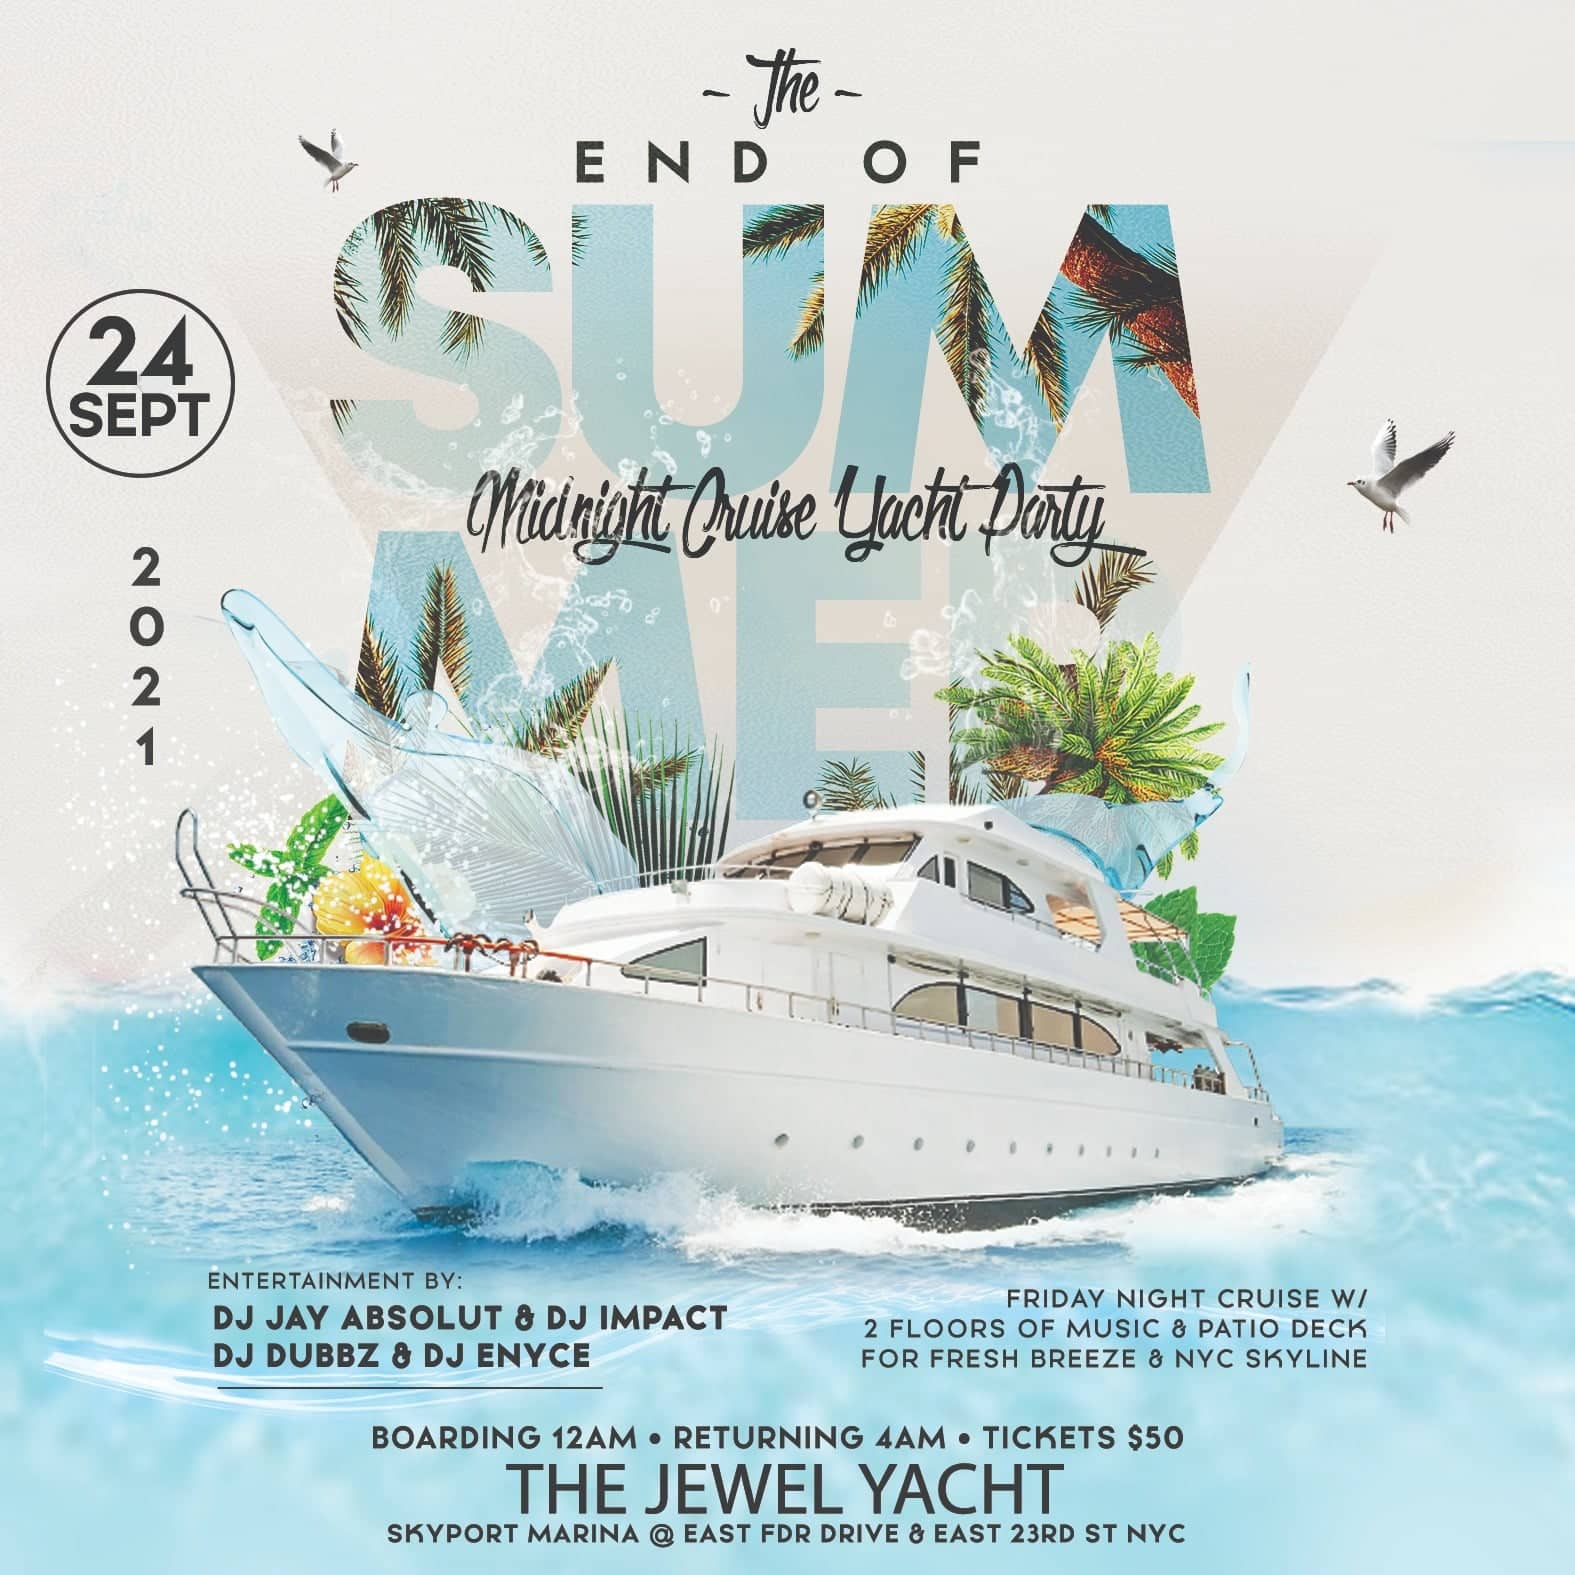 END OF SUMMER MIDNIGHT CRUISE 2